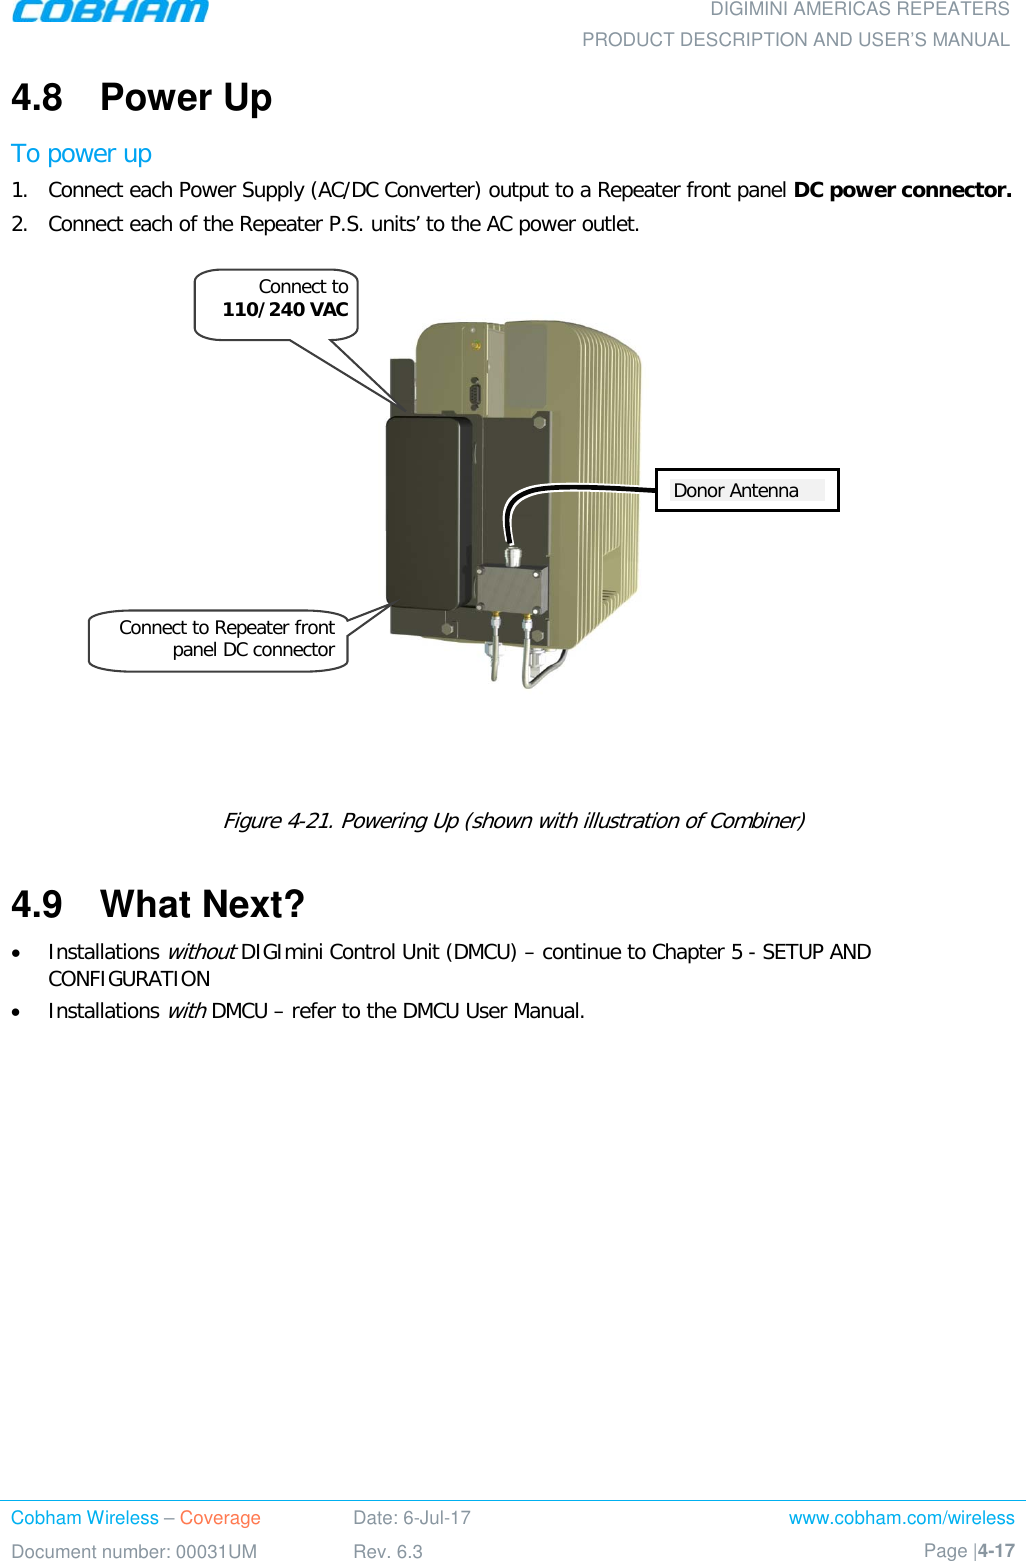  DIGIMINI AMERICAS REPEATERS PRODUCT DESCRIPTION AND USER’S MANUAL Cobham Wireless – Coverage Date: 6-Jul-17 www.cobham.com/wireless Document number: 00031UM Rev. 6.3 Page |4-17  4.8  Power Up To power up 1.  Connect each Power Supply (AC/DC Converter) output to a Repeater front panel DC power connector. 2.  Connect each of the Repeater P.S. units’ to the AC power outlet.        Figure  4-21. Powering Up (shown with illustration of Combiner) 4.9  What Next? • Installations without DIGImini Control Unit (DMCU) – continue to Chapter  5 - SETUP AND CONFIGURATION • Installations with DMCU – refer to the DMCU User Manual. Connect to 110/240 VAC Donor Antenna Connect to Repeater front panel DC connector 